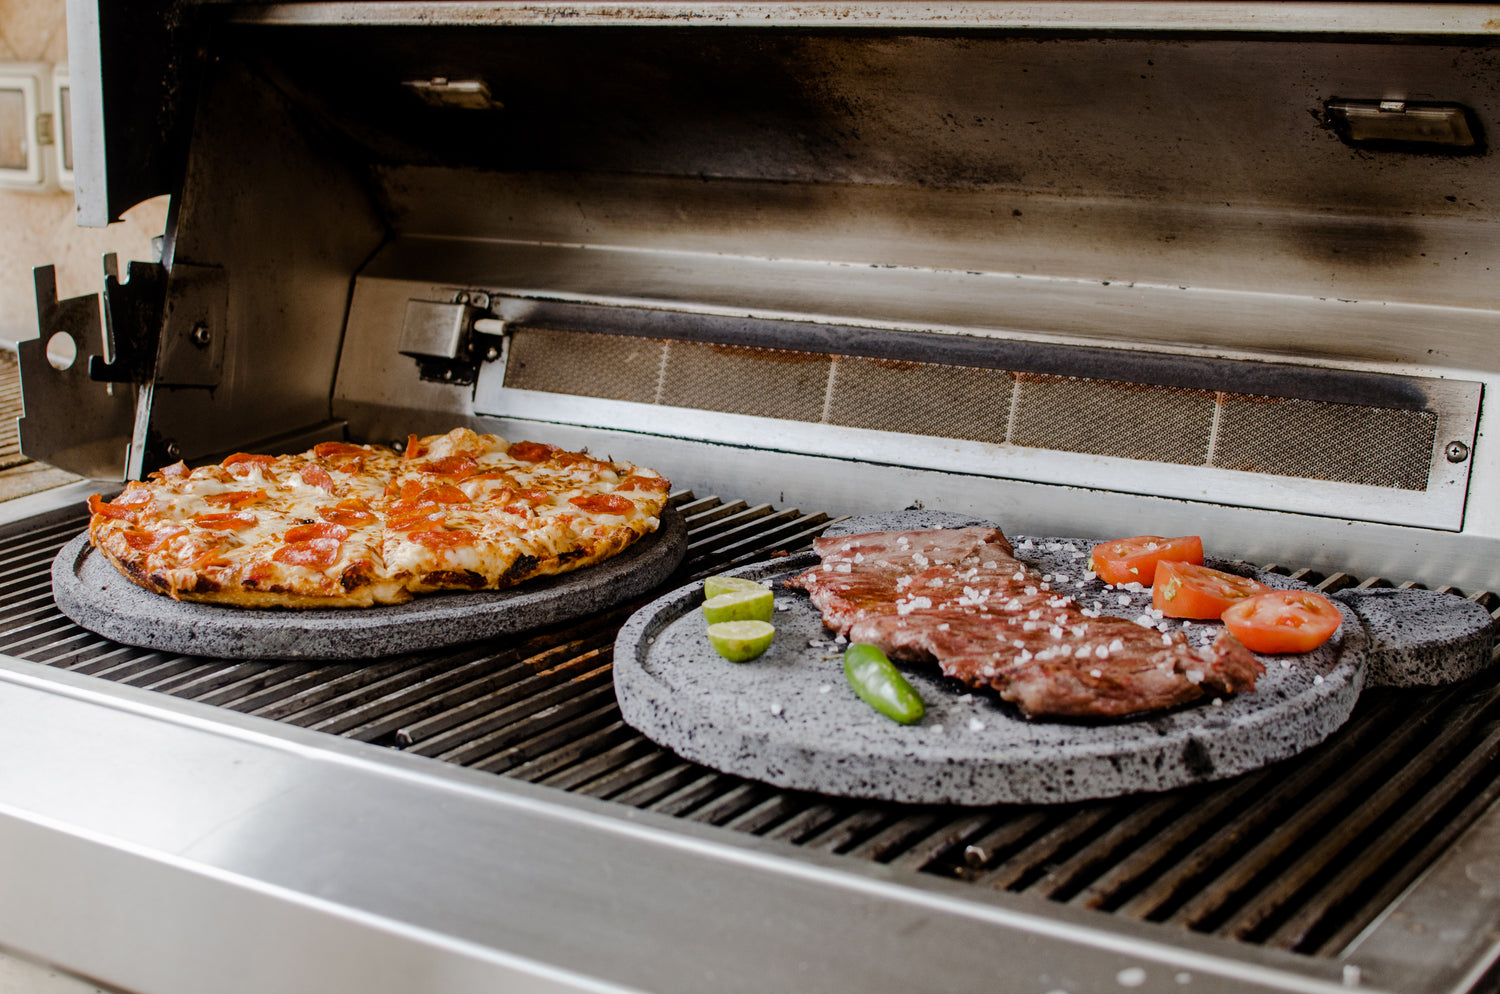 To use a comal effectively, follow these steps: